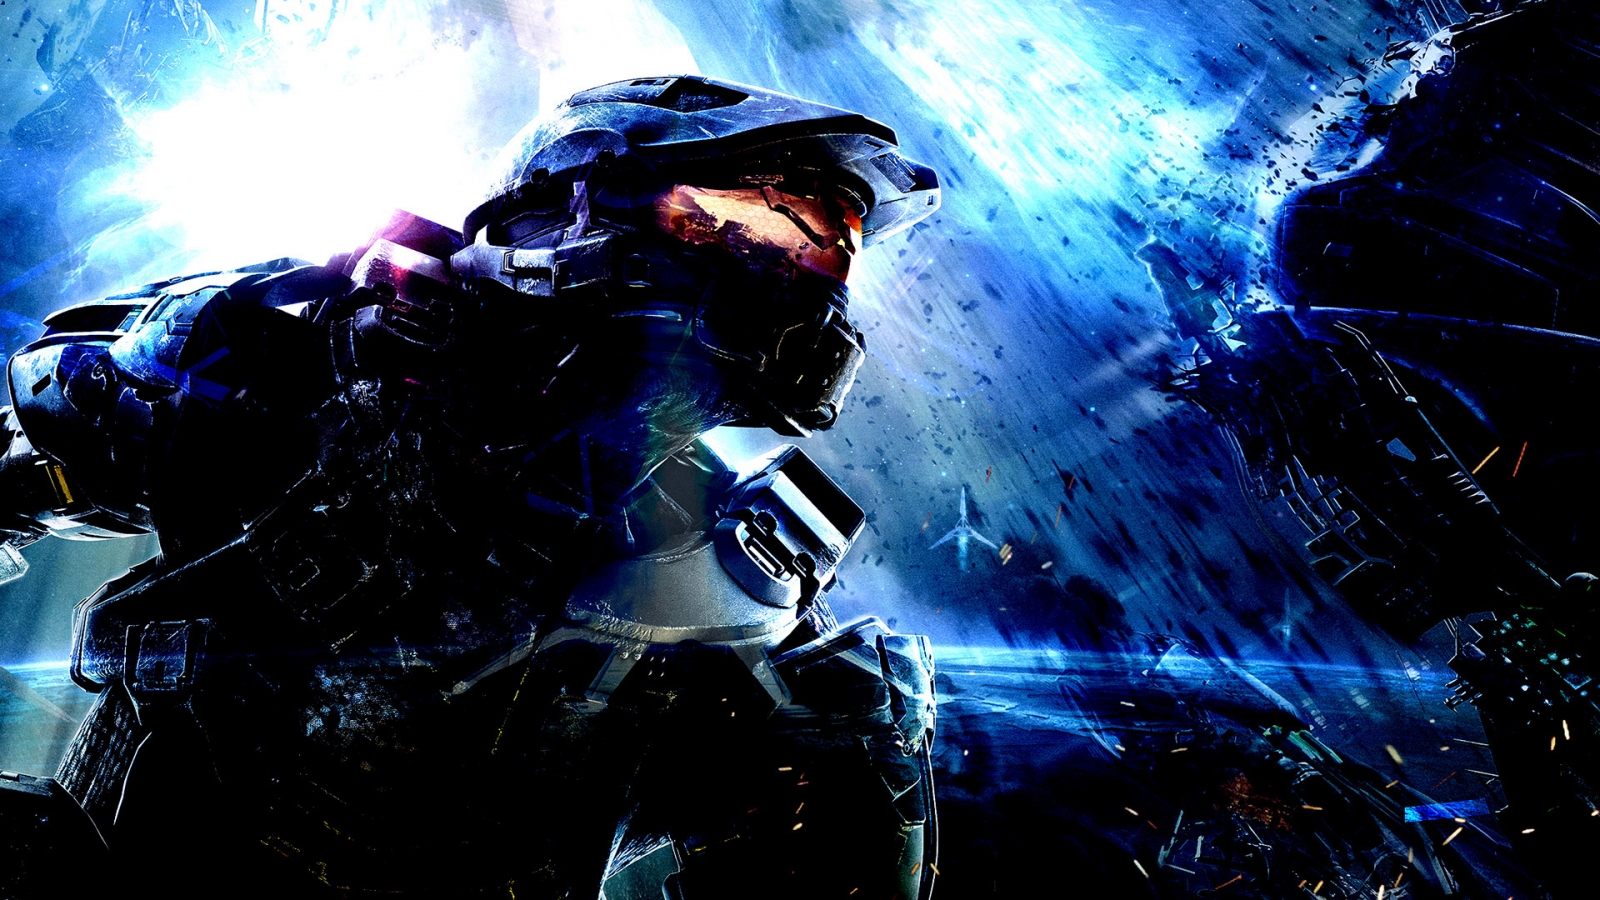 Halo 4 Complex for 1600 x 900 HDTV resolution